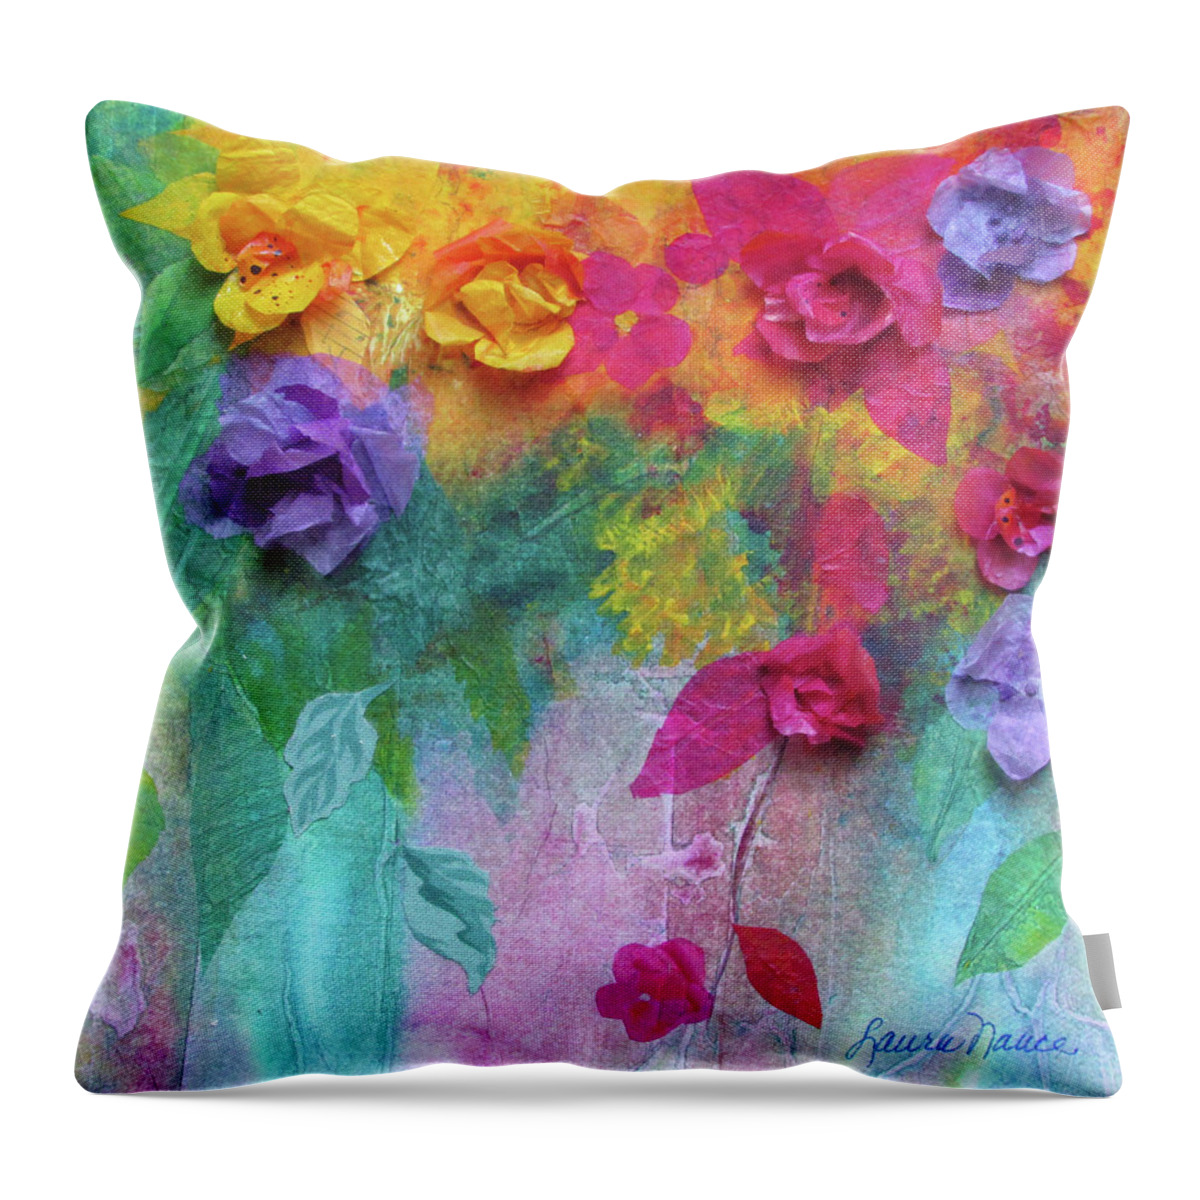 Bright Throw Pillow featuring the painting From My Garden by Laura Nance